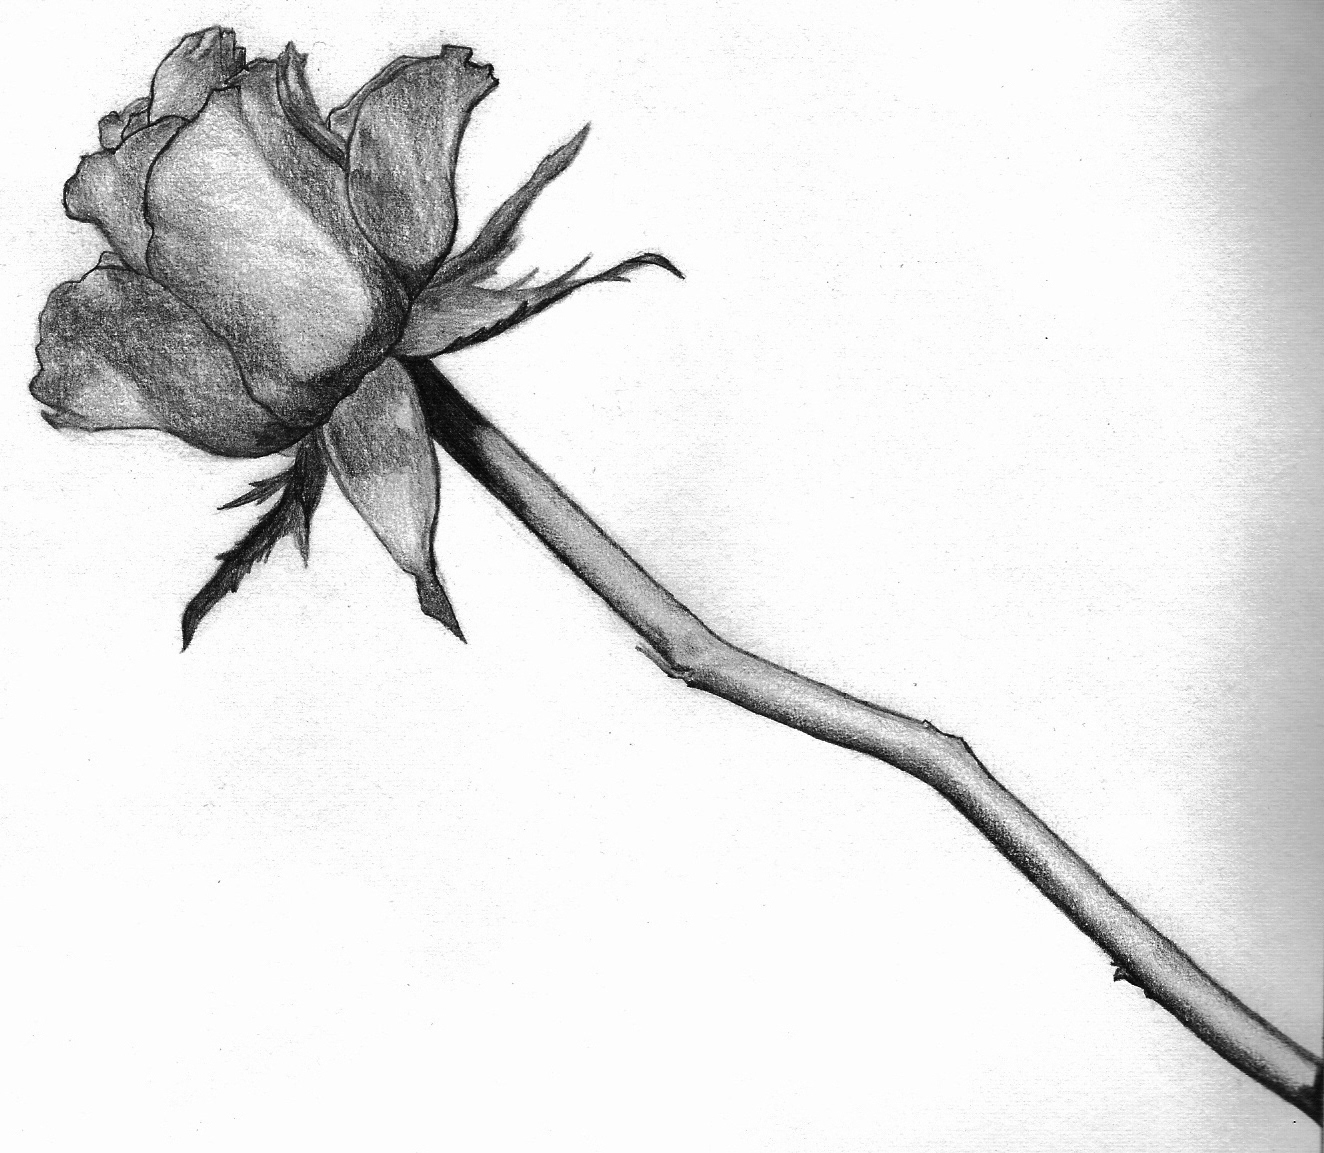 Black And White Rose By Laura-20 On DeviantArt - Cliparts.co